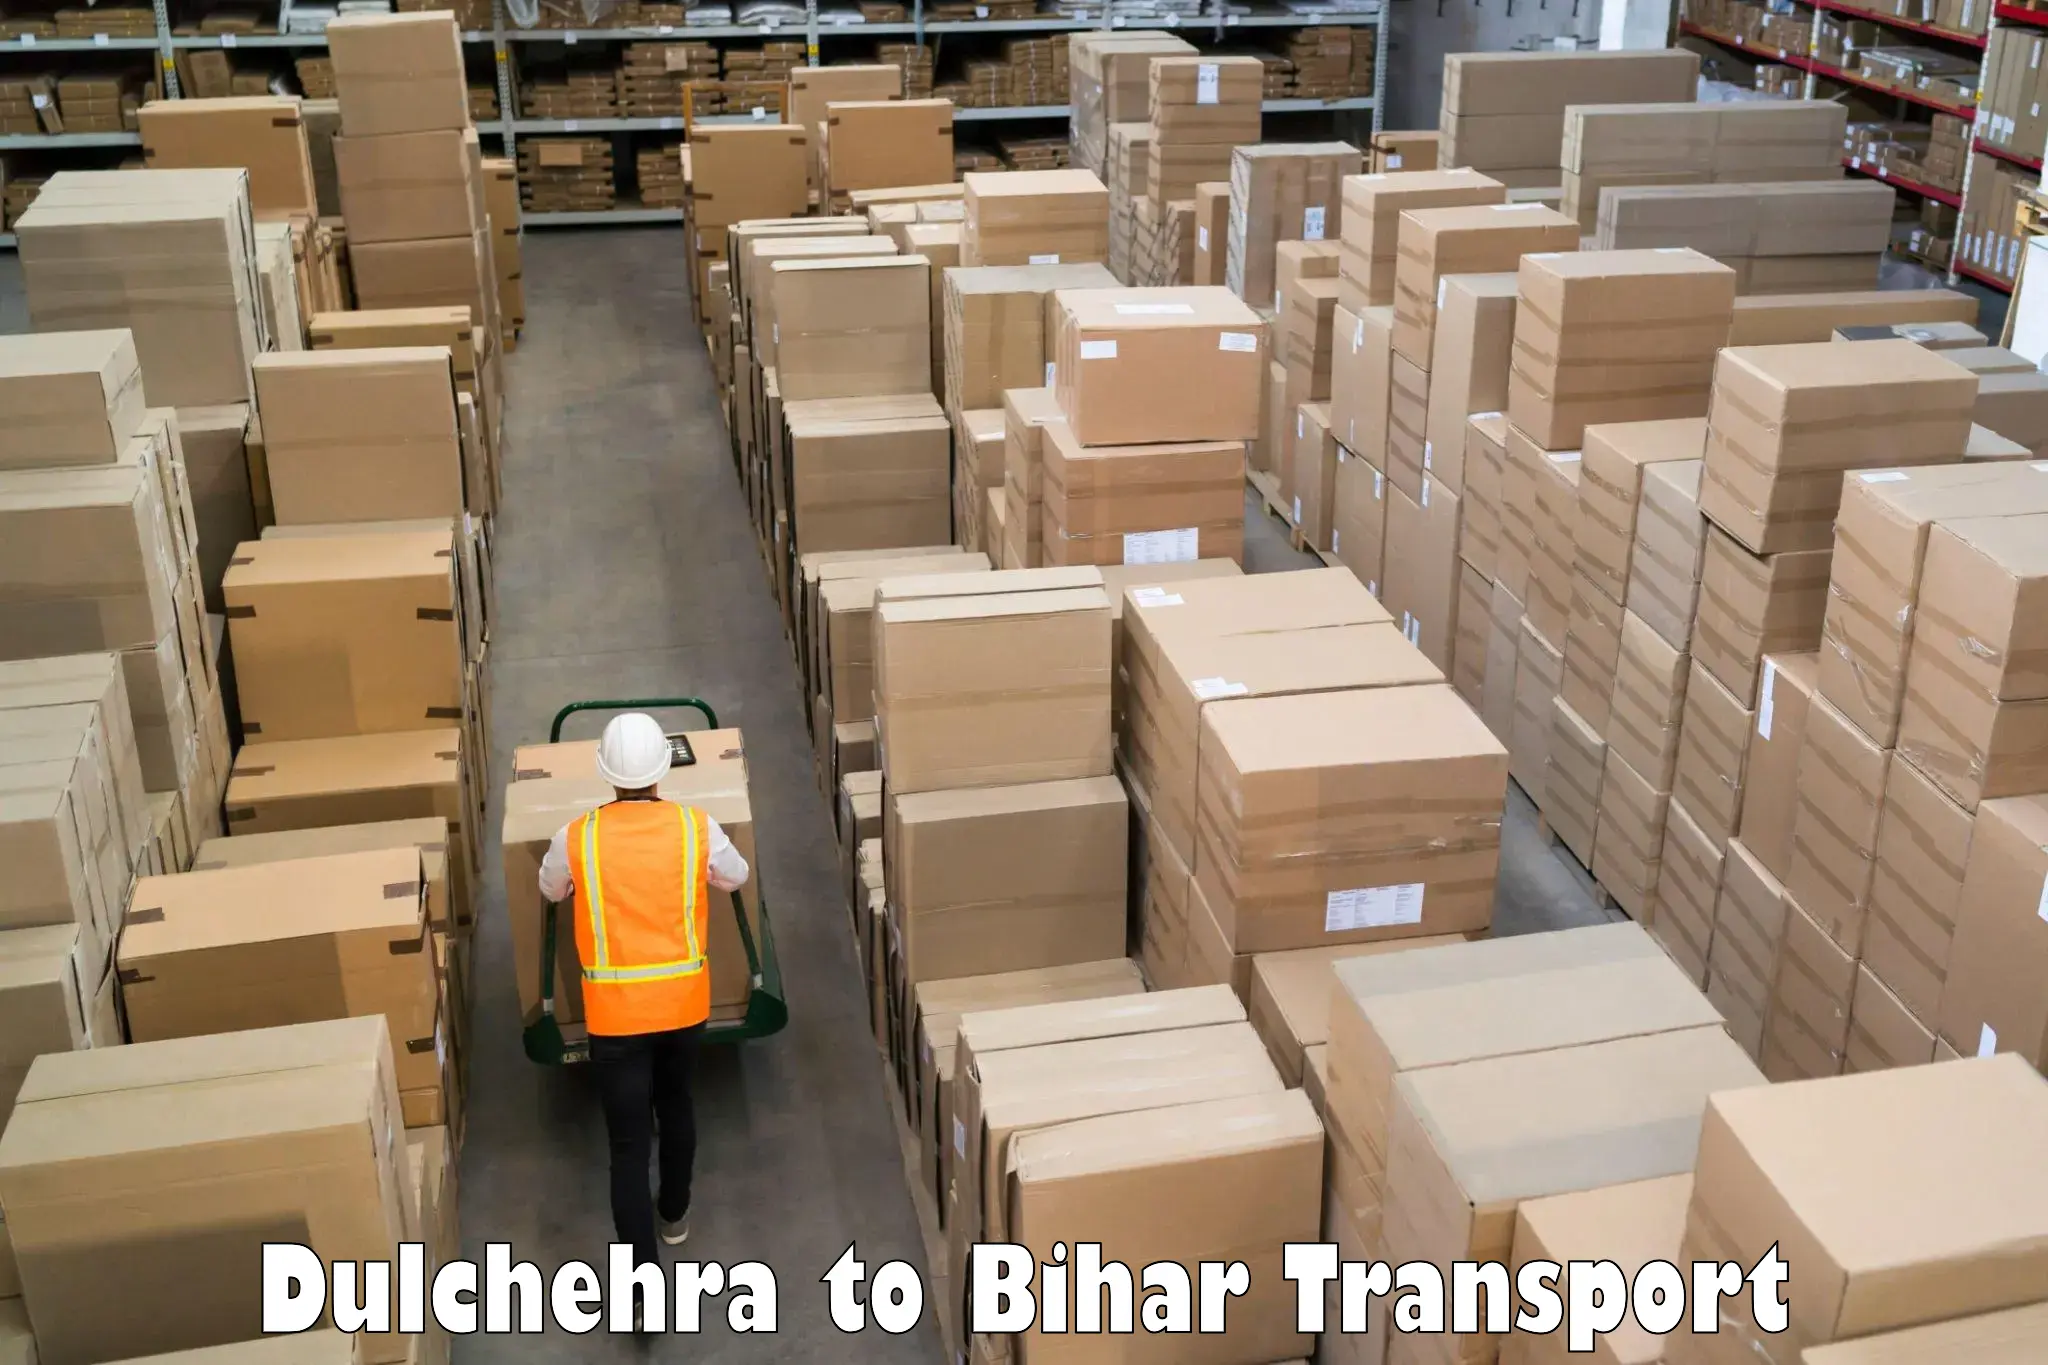 Part load transport service in India Dulchehra to Nuaon